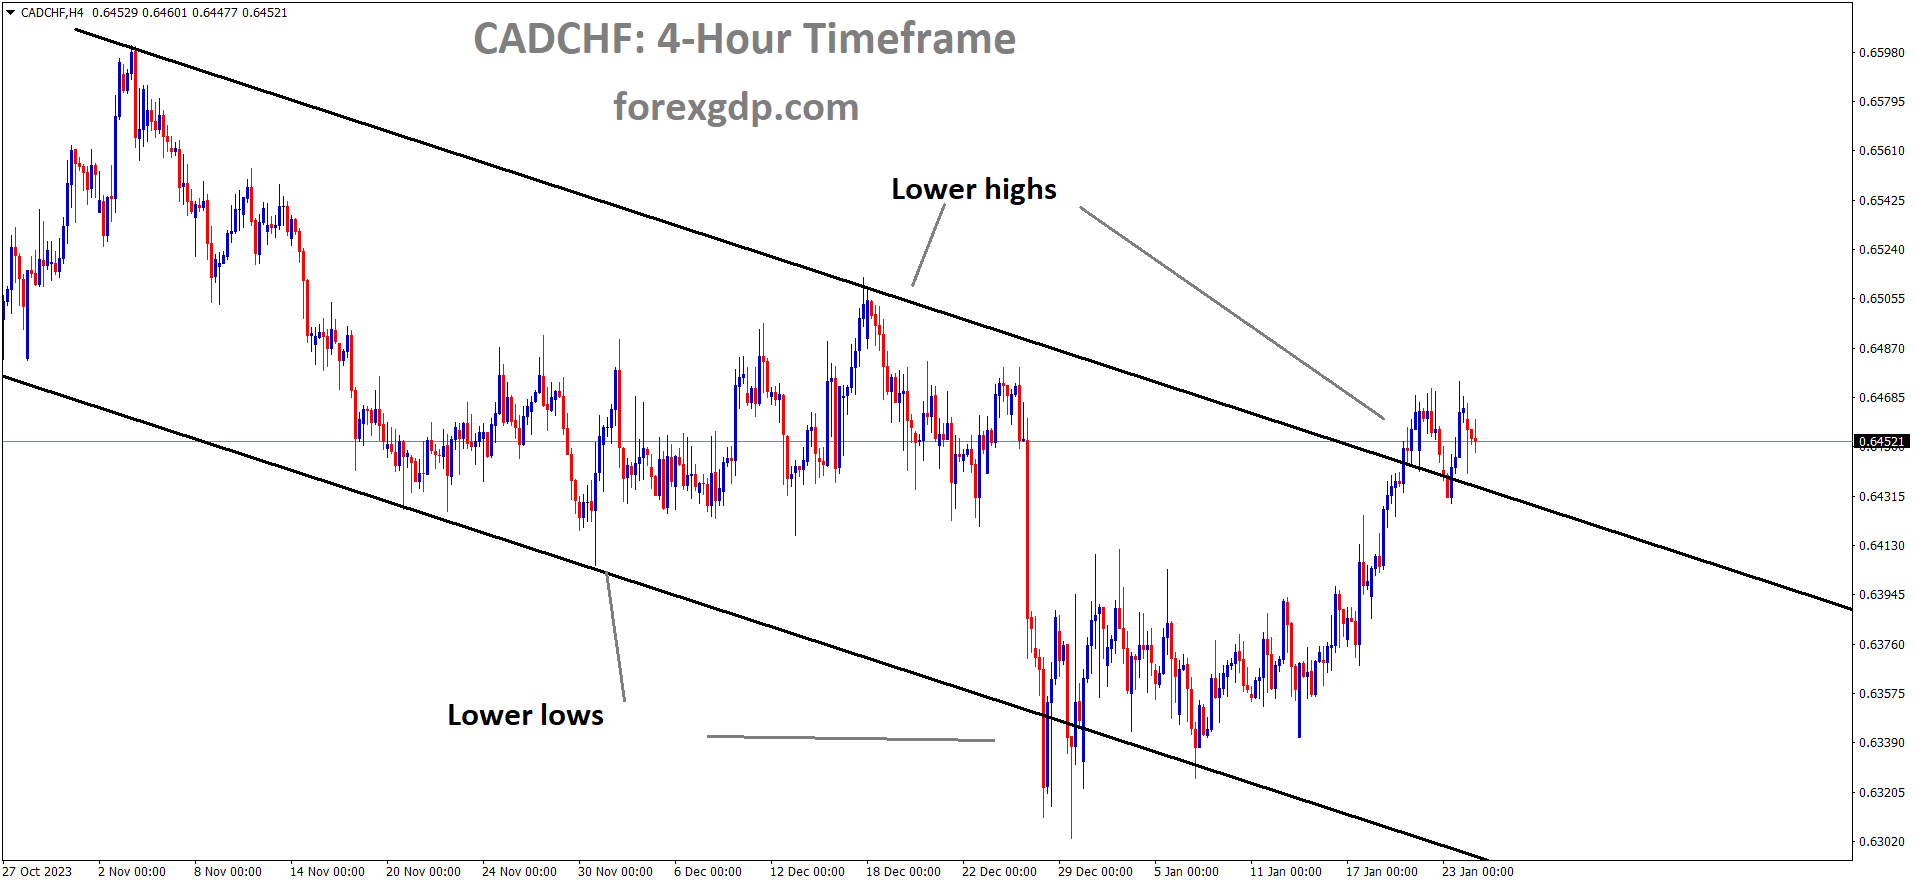 CADCHF is moving in the Descending channel and the market has reached the lower high area of the channel